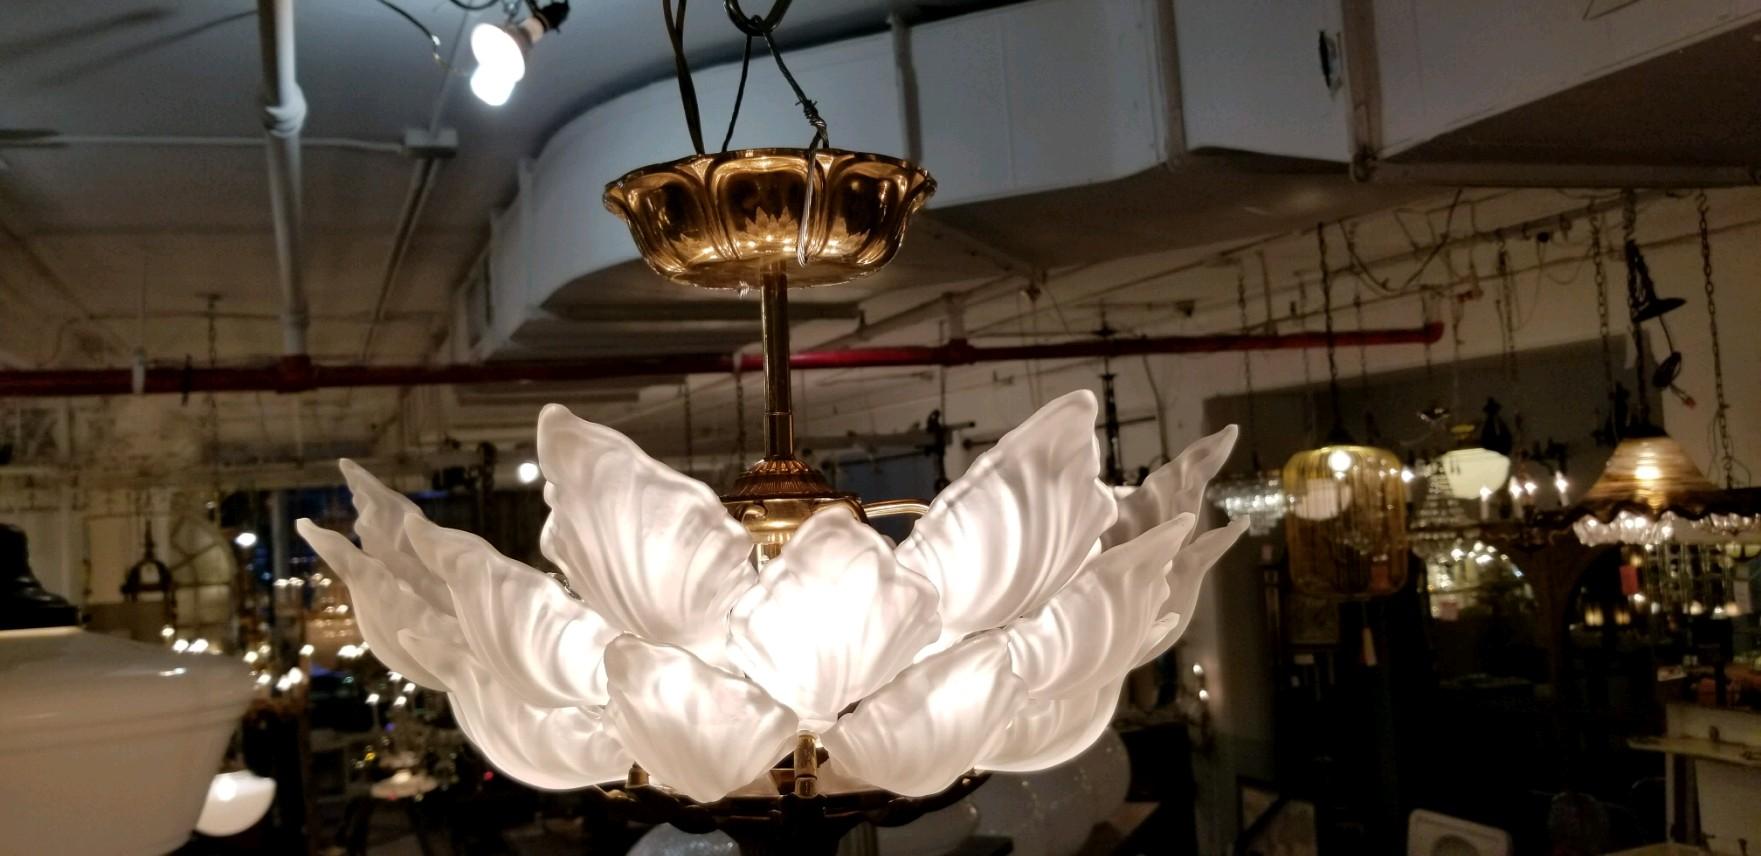 1931 large size Alba Macbeth Evans white petal ceiling fixture made of cast glass with a heavy brass fitter. Three tiers of leaves with five sockets. This is a semi flush fixture. These lights adorned various suites of the Towers of the NYC Waldorf